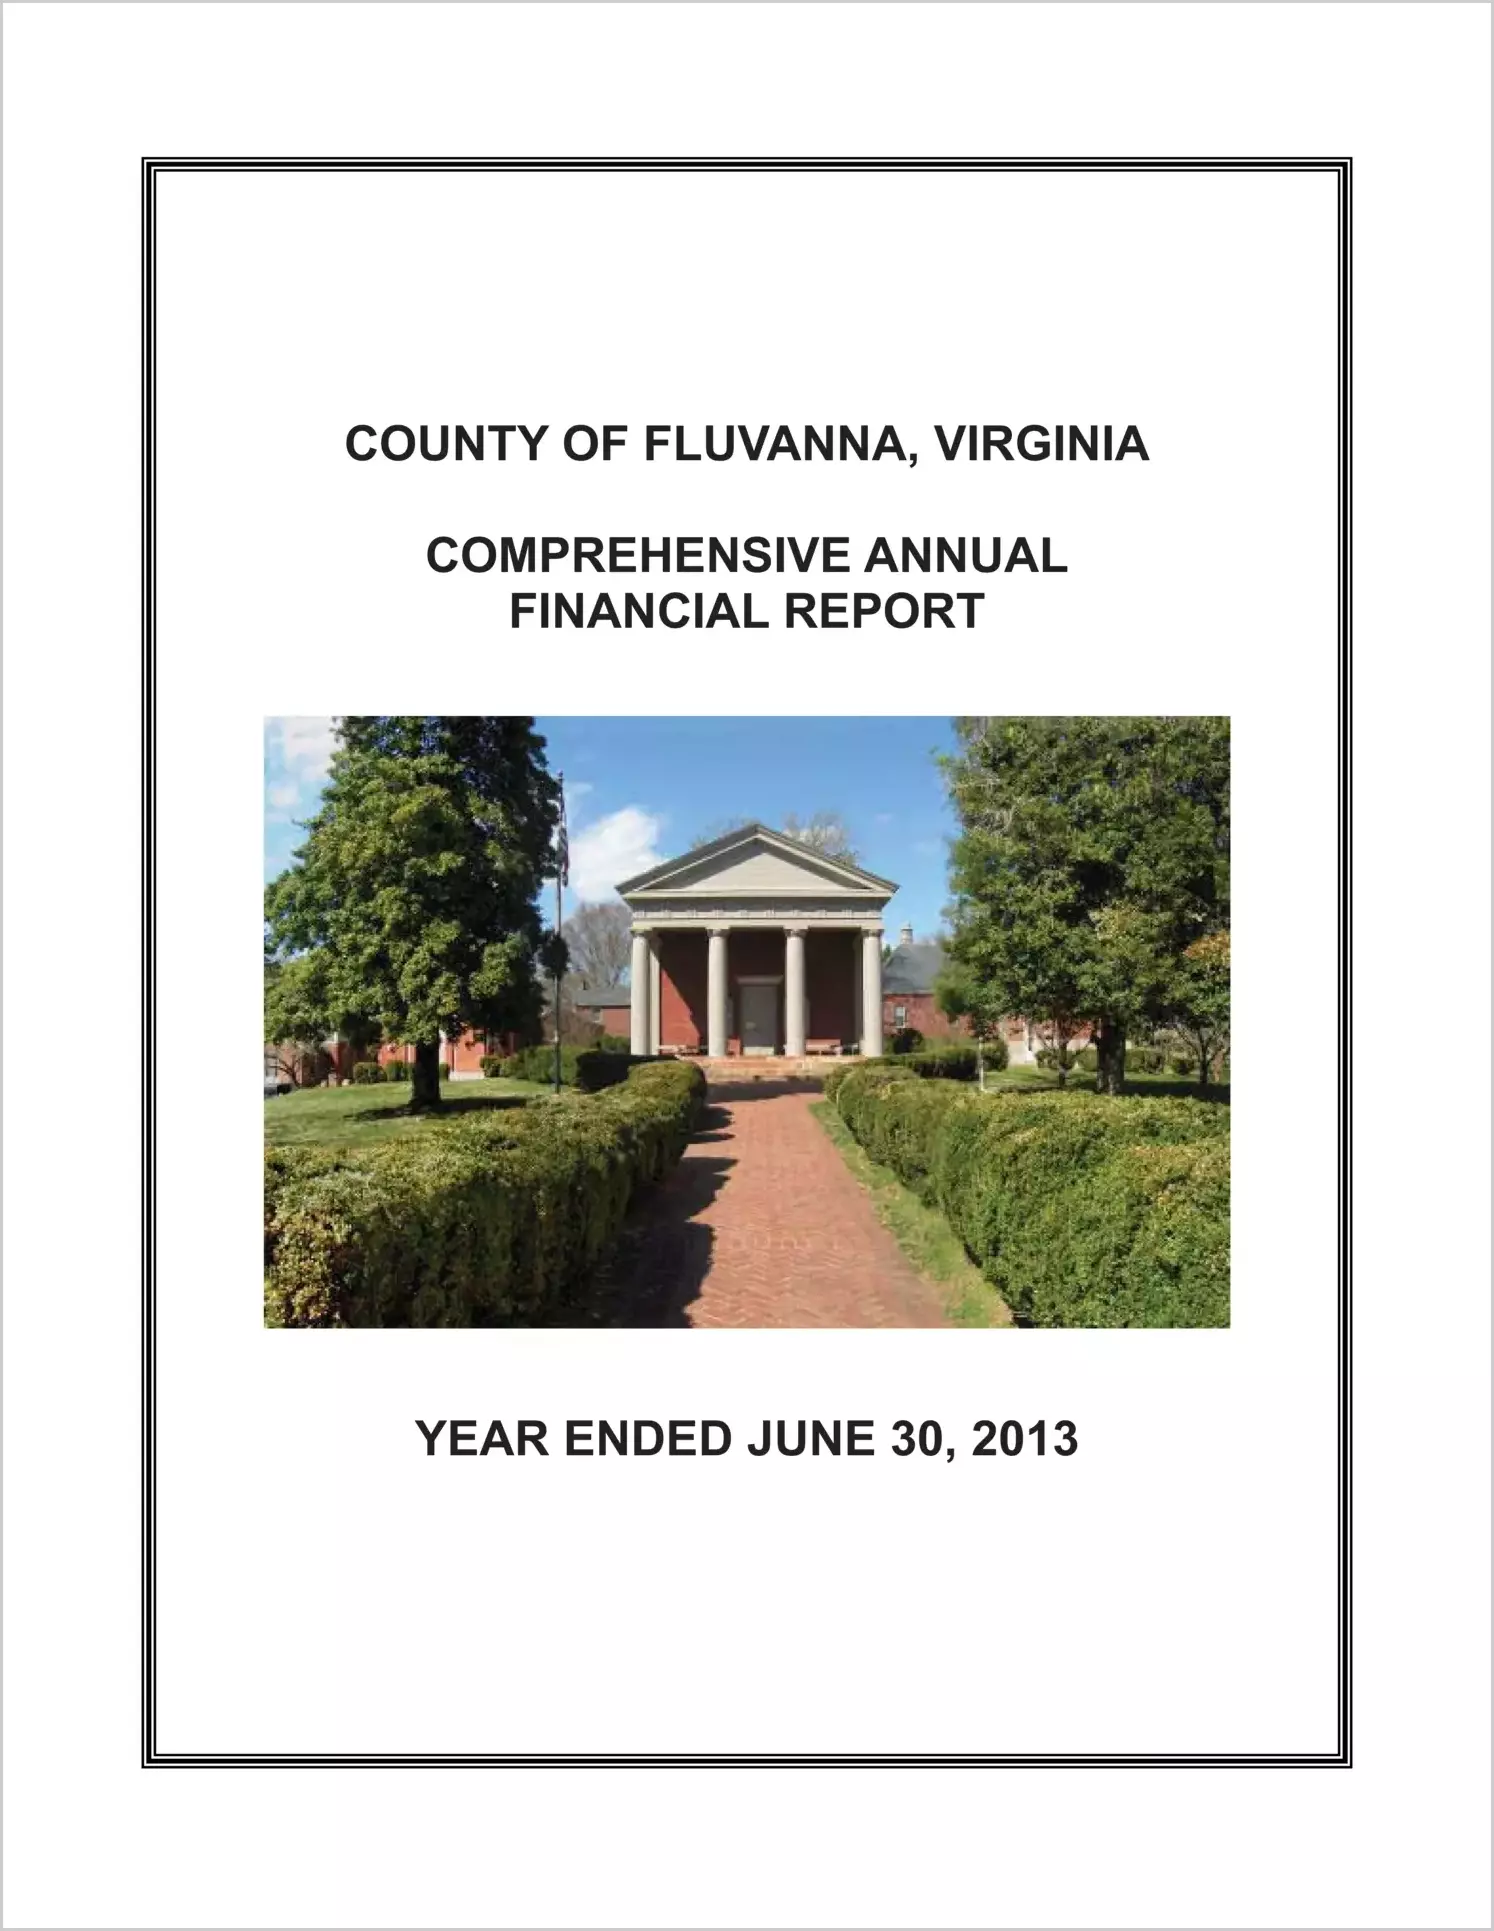 2013 Annual Financial Report for County of Fluvanna